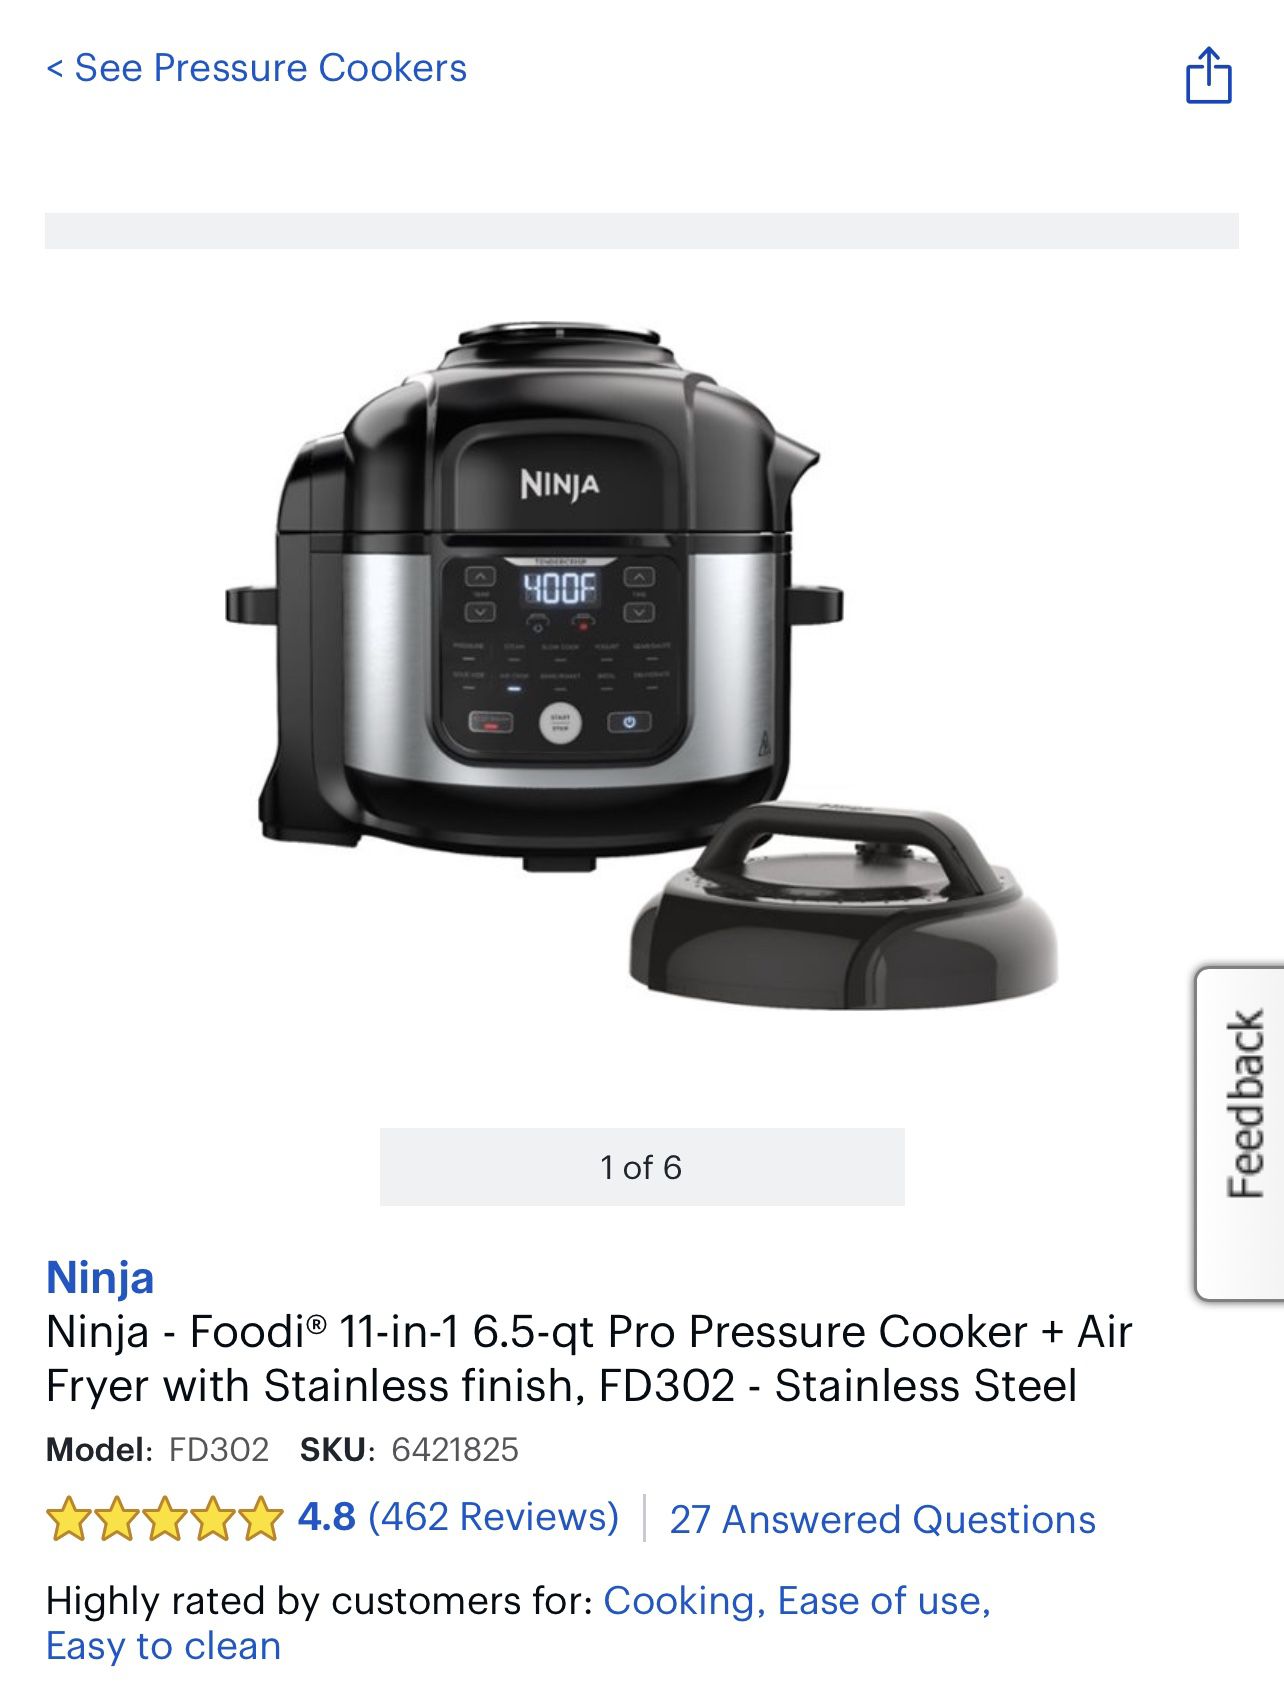 Ninja - Foodi 11-in-1 6.5-qt Pro Pressure Cooker + Air Fryer with Stainless  finish, FD302 - Stainless Steel for Sale in Queens, NY - OfferUp